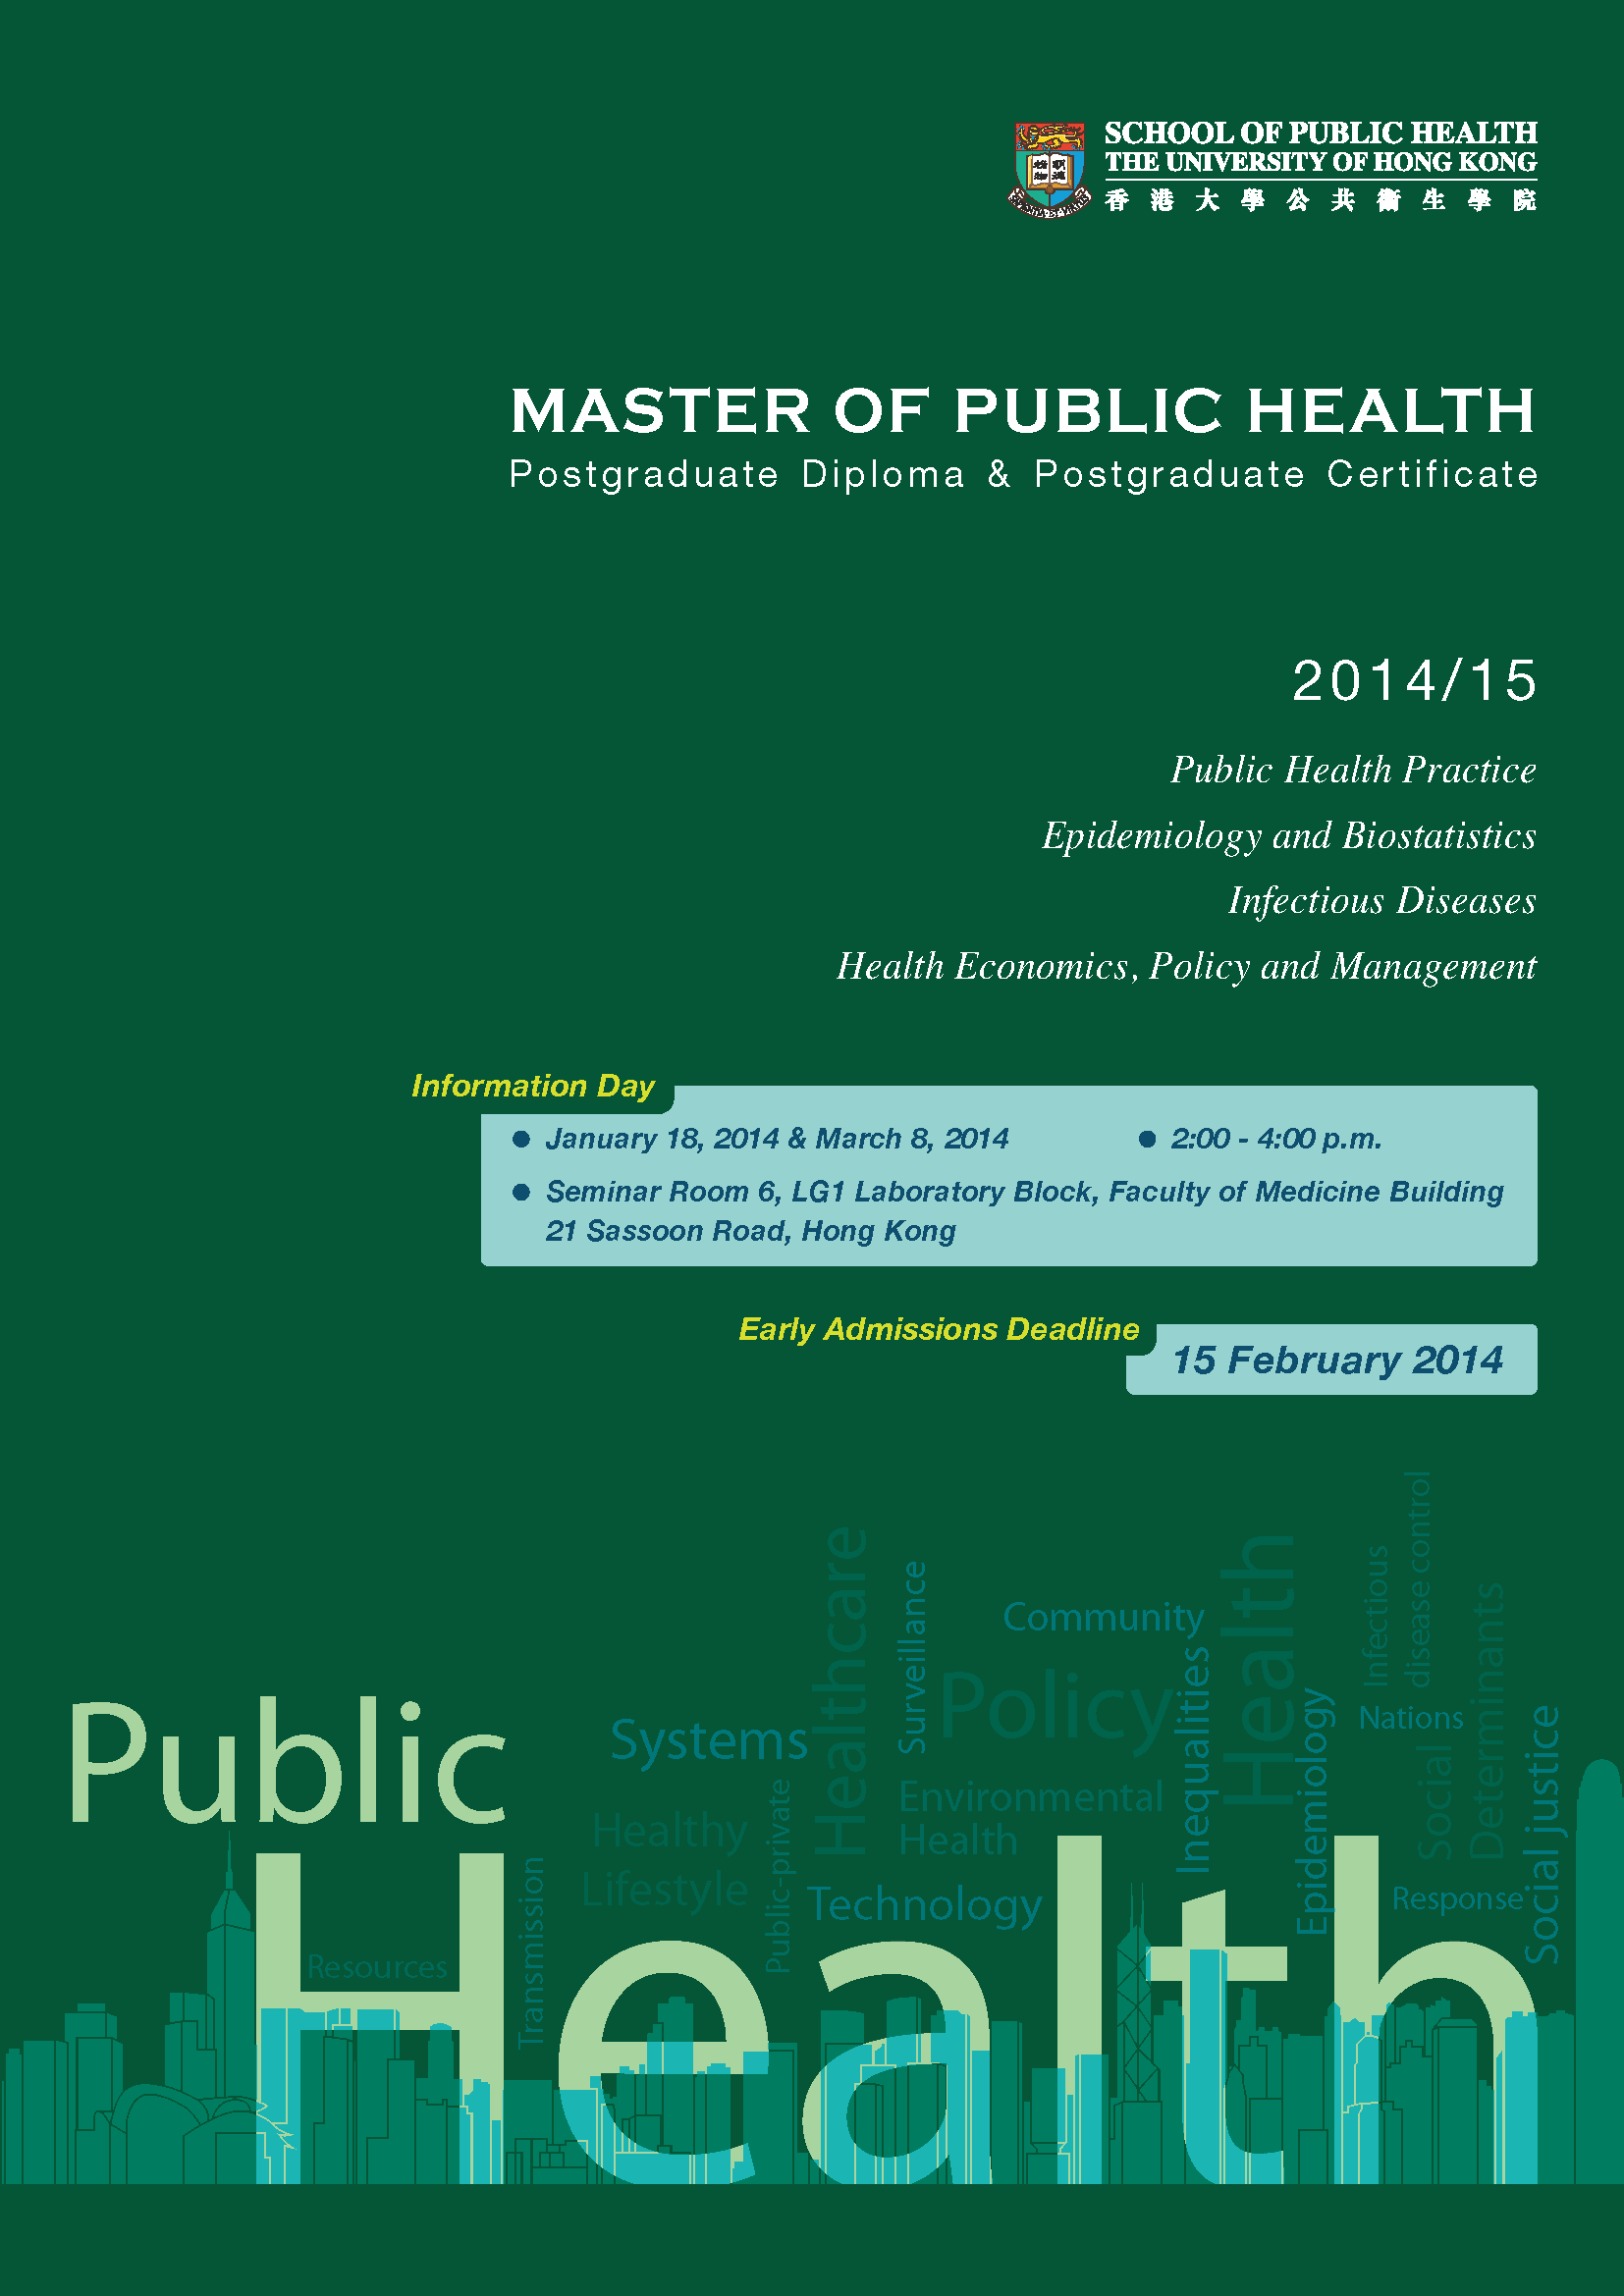 Master of Public Health Information Day 2014 & Early Admissions Deadline